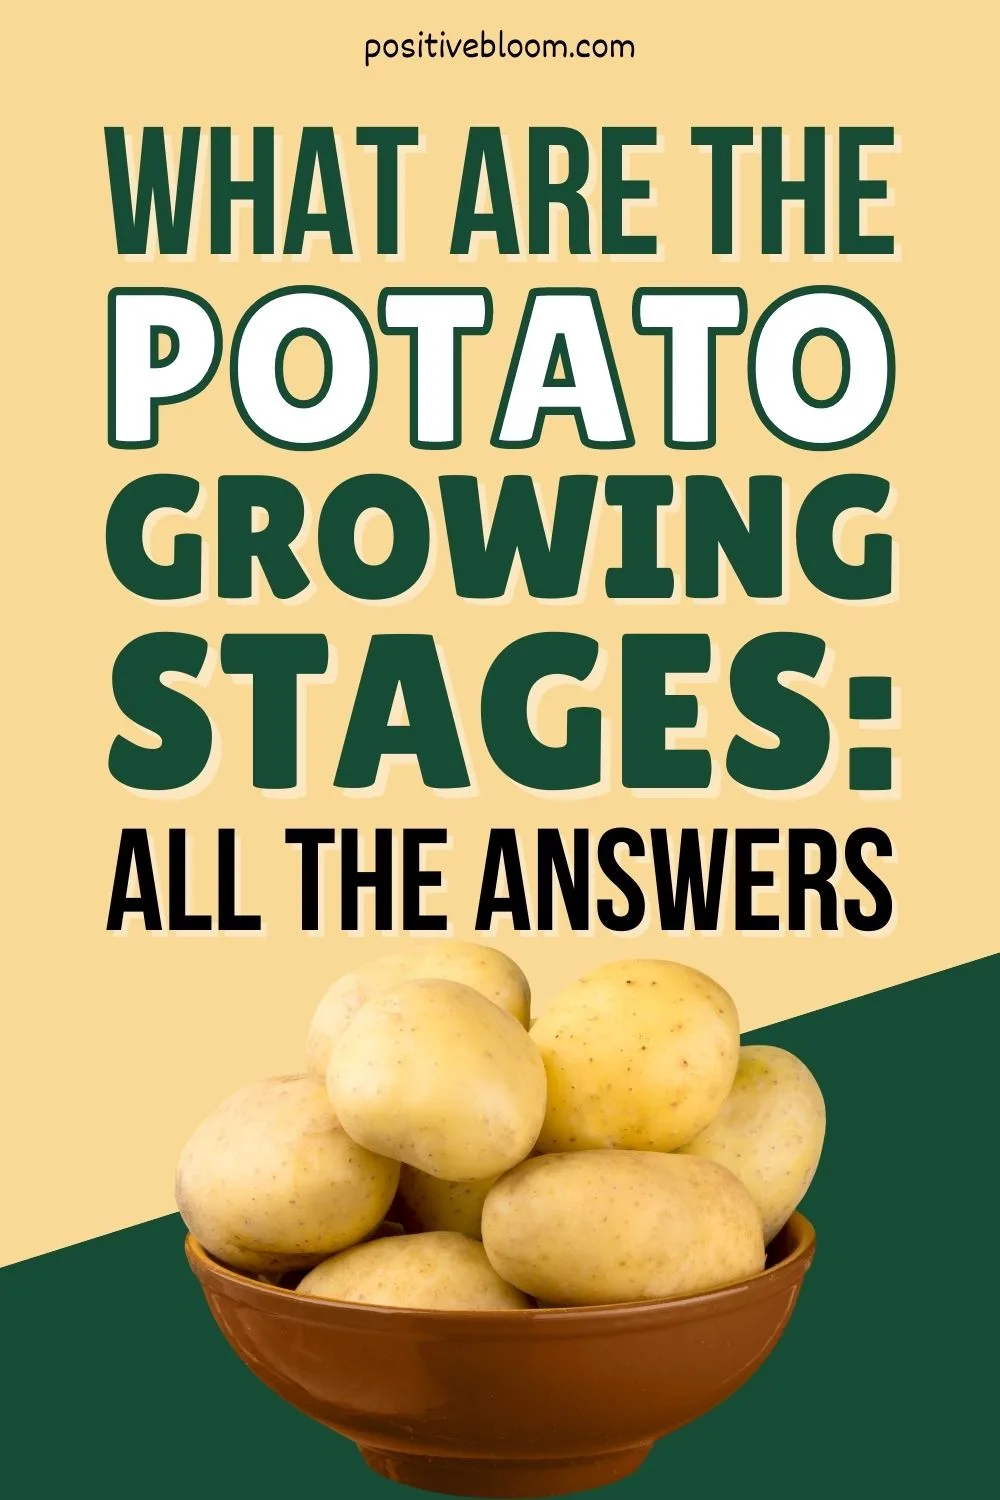 What Are The Potato Growing Stages All The Answers And More Pinterest